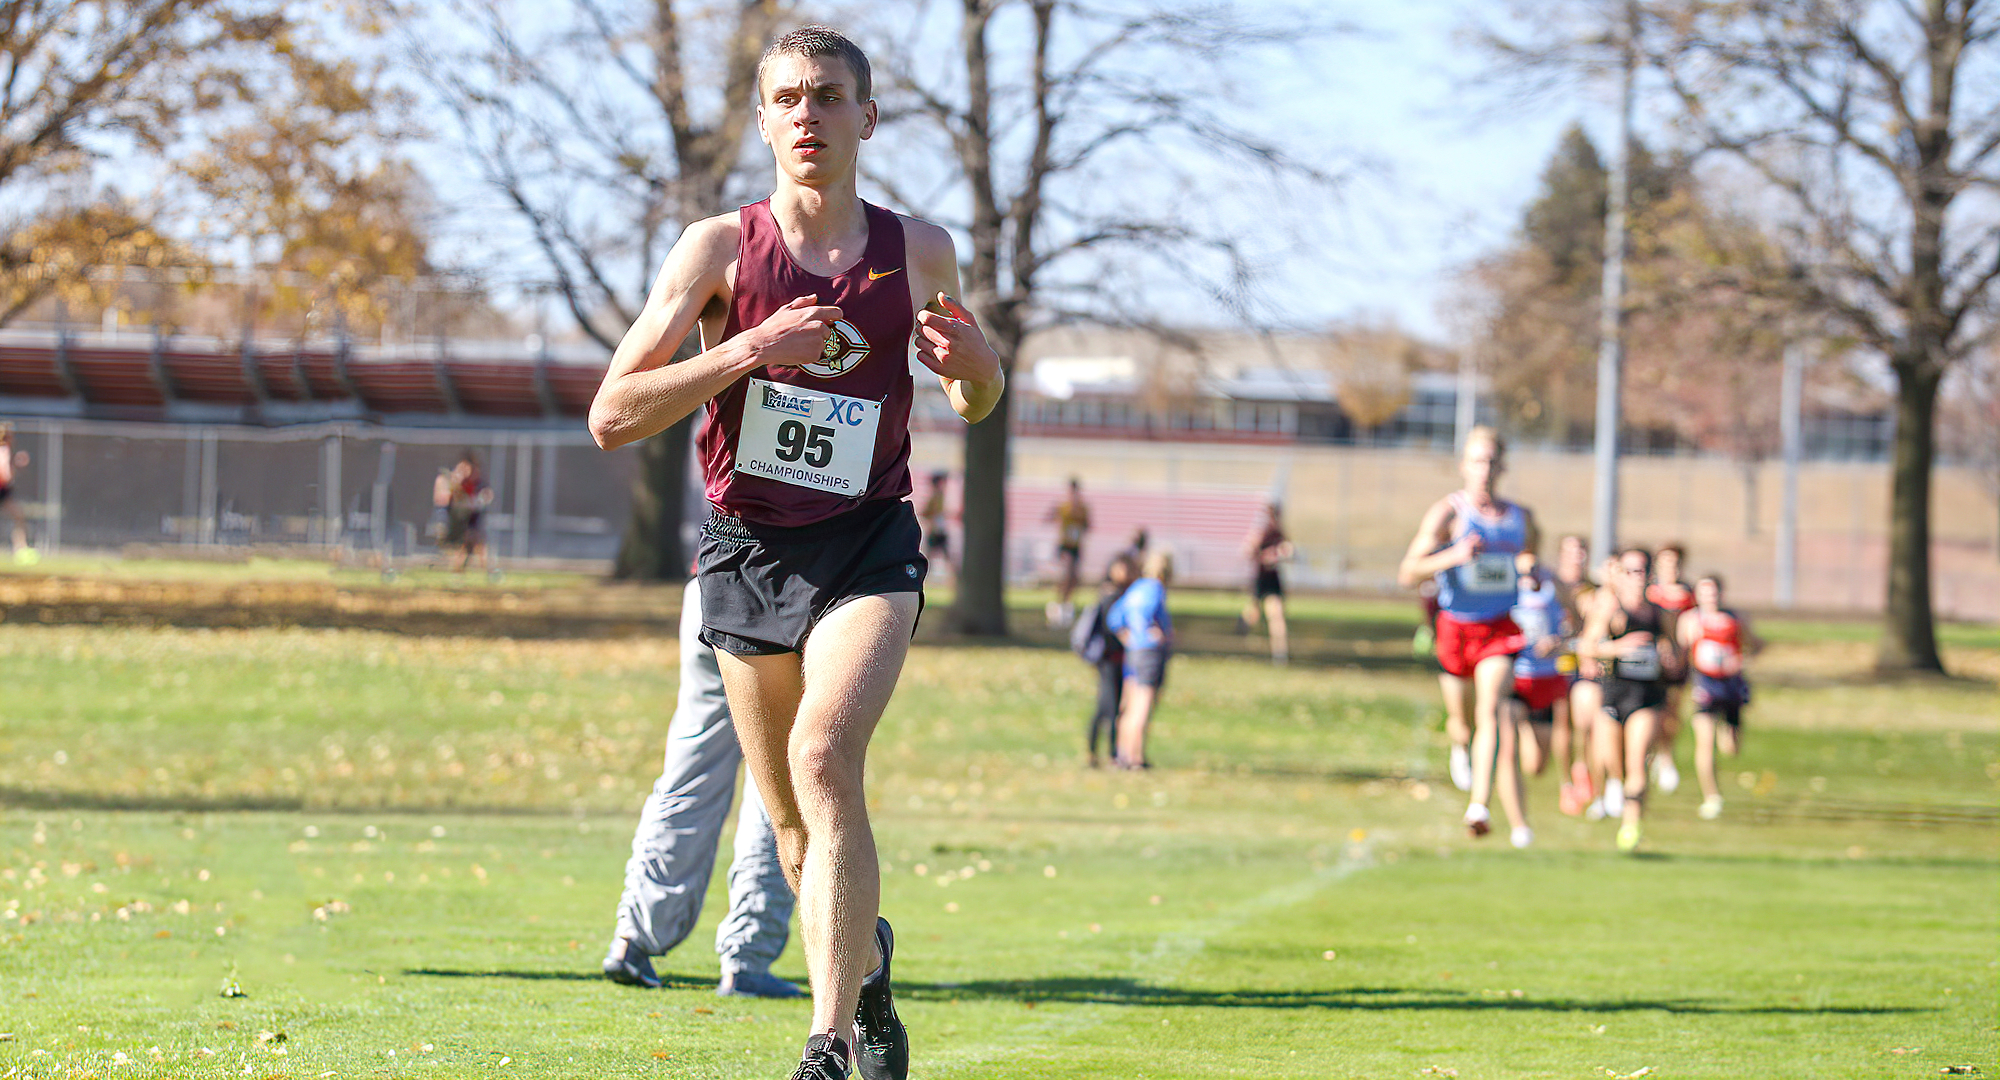 Leo Smith races through the MIAC Meet on his way to his second straight All-MIAC Honorable Mention honor. (Photo courtesy of Nathan Lodermeier)